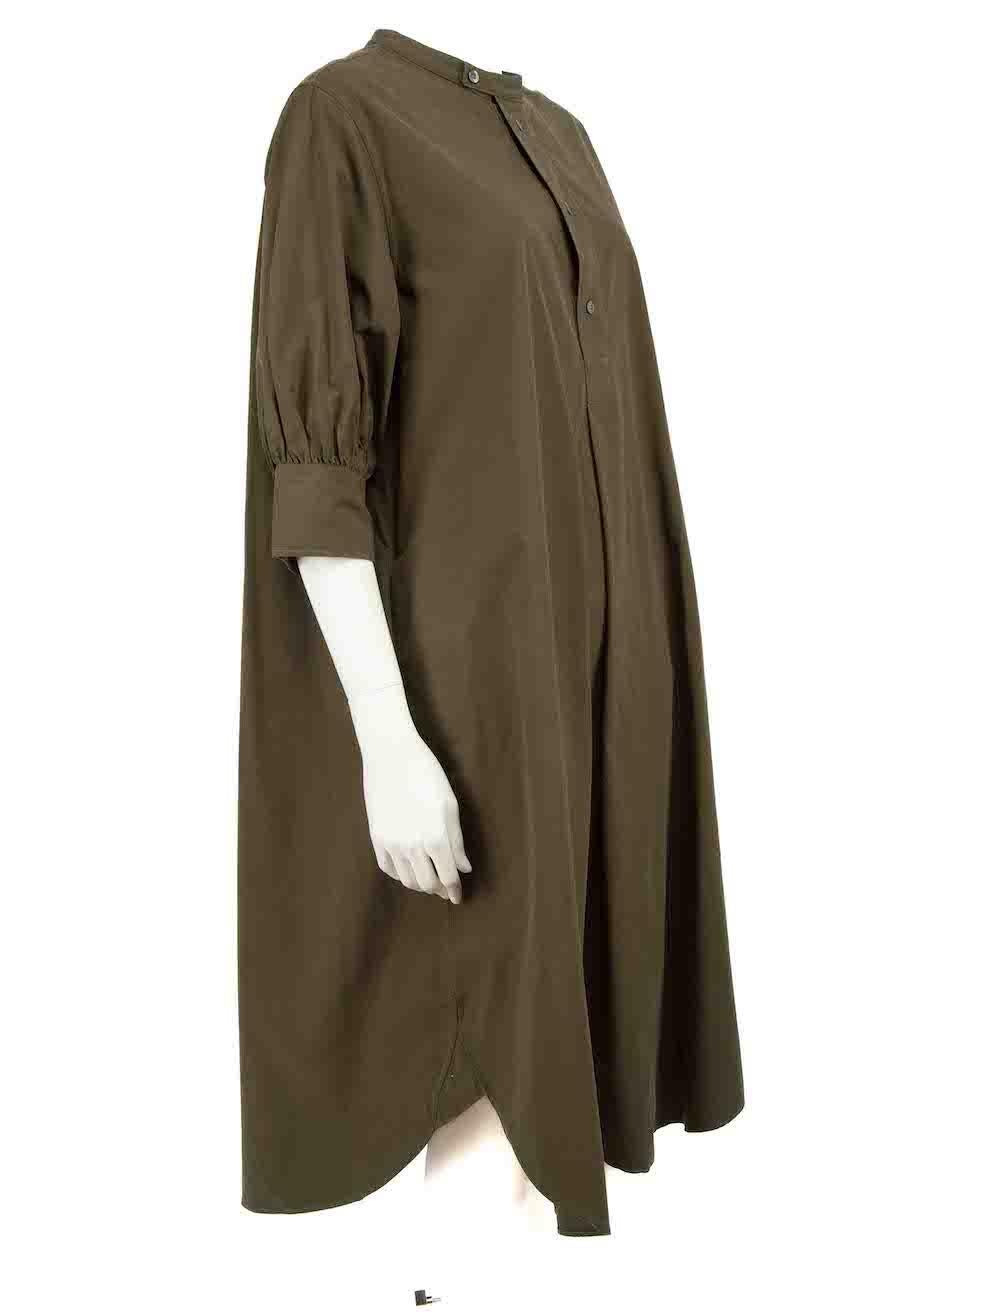 CONDITION is Good. Minor wear to dress is evident. Light wear to the front with light marks on this used Studio Nicholson designer resale item.
 
 Details
 Green
 Cotton
 Shirt dress
 Midi
 Button fastening
 Short puff sleeves
 2x Side pockets
 
 
